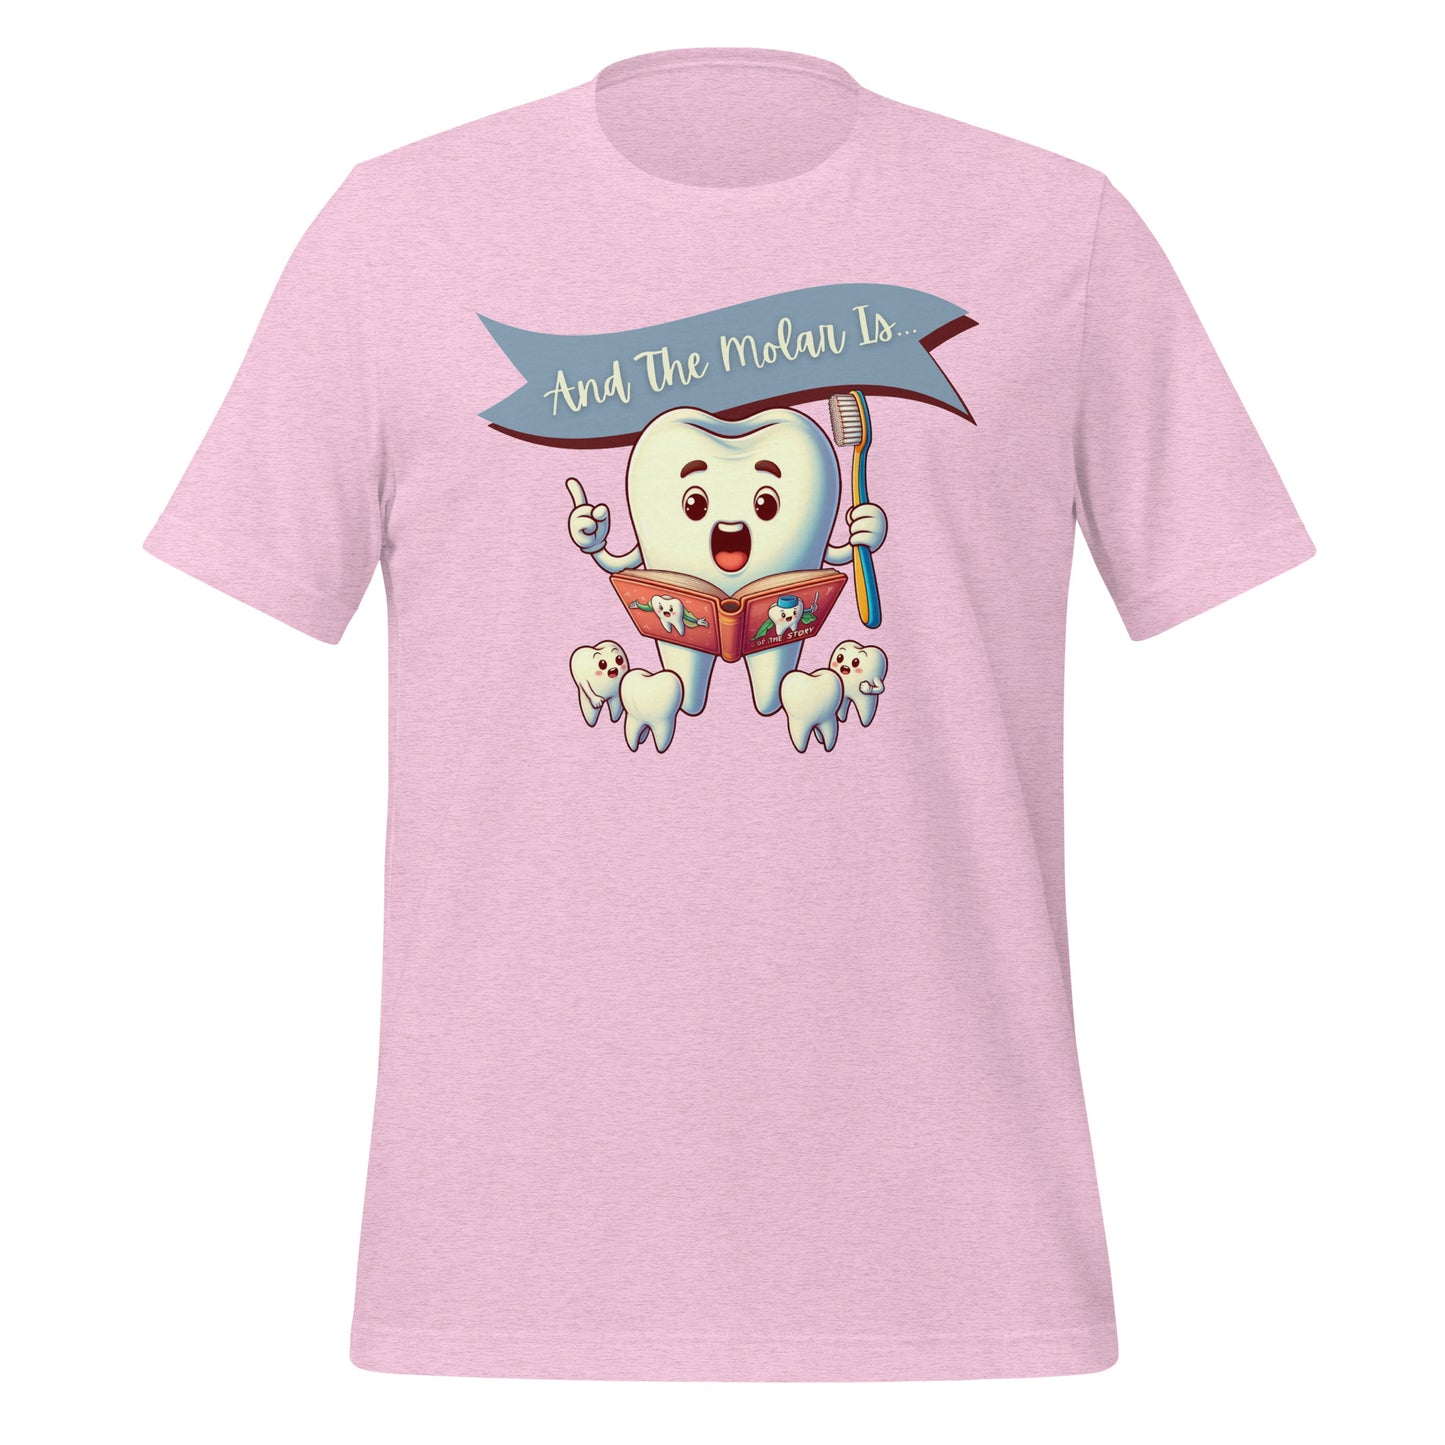 Cute dental shirt featuring a smiling tooth character reading a book with the caption ‘And The Molar Is,’ surrounded by smaller tooth characters. Heather prism lilac color.